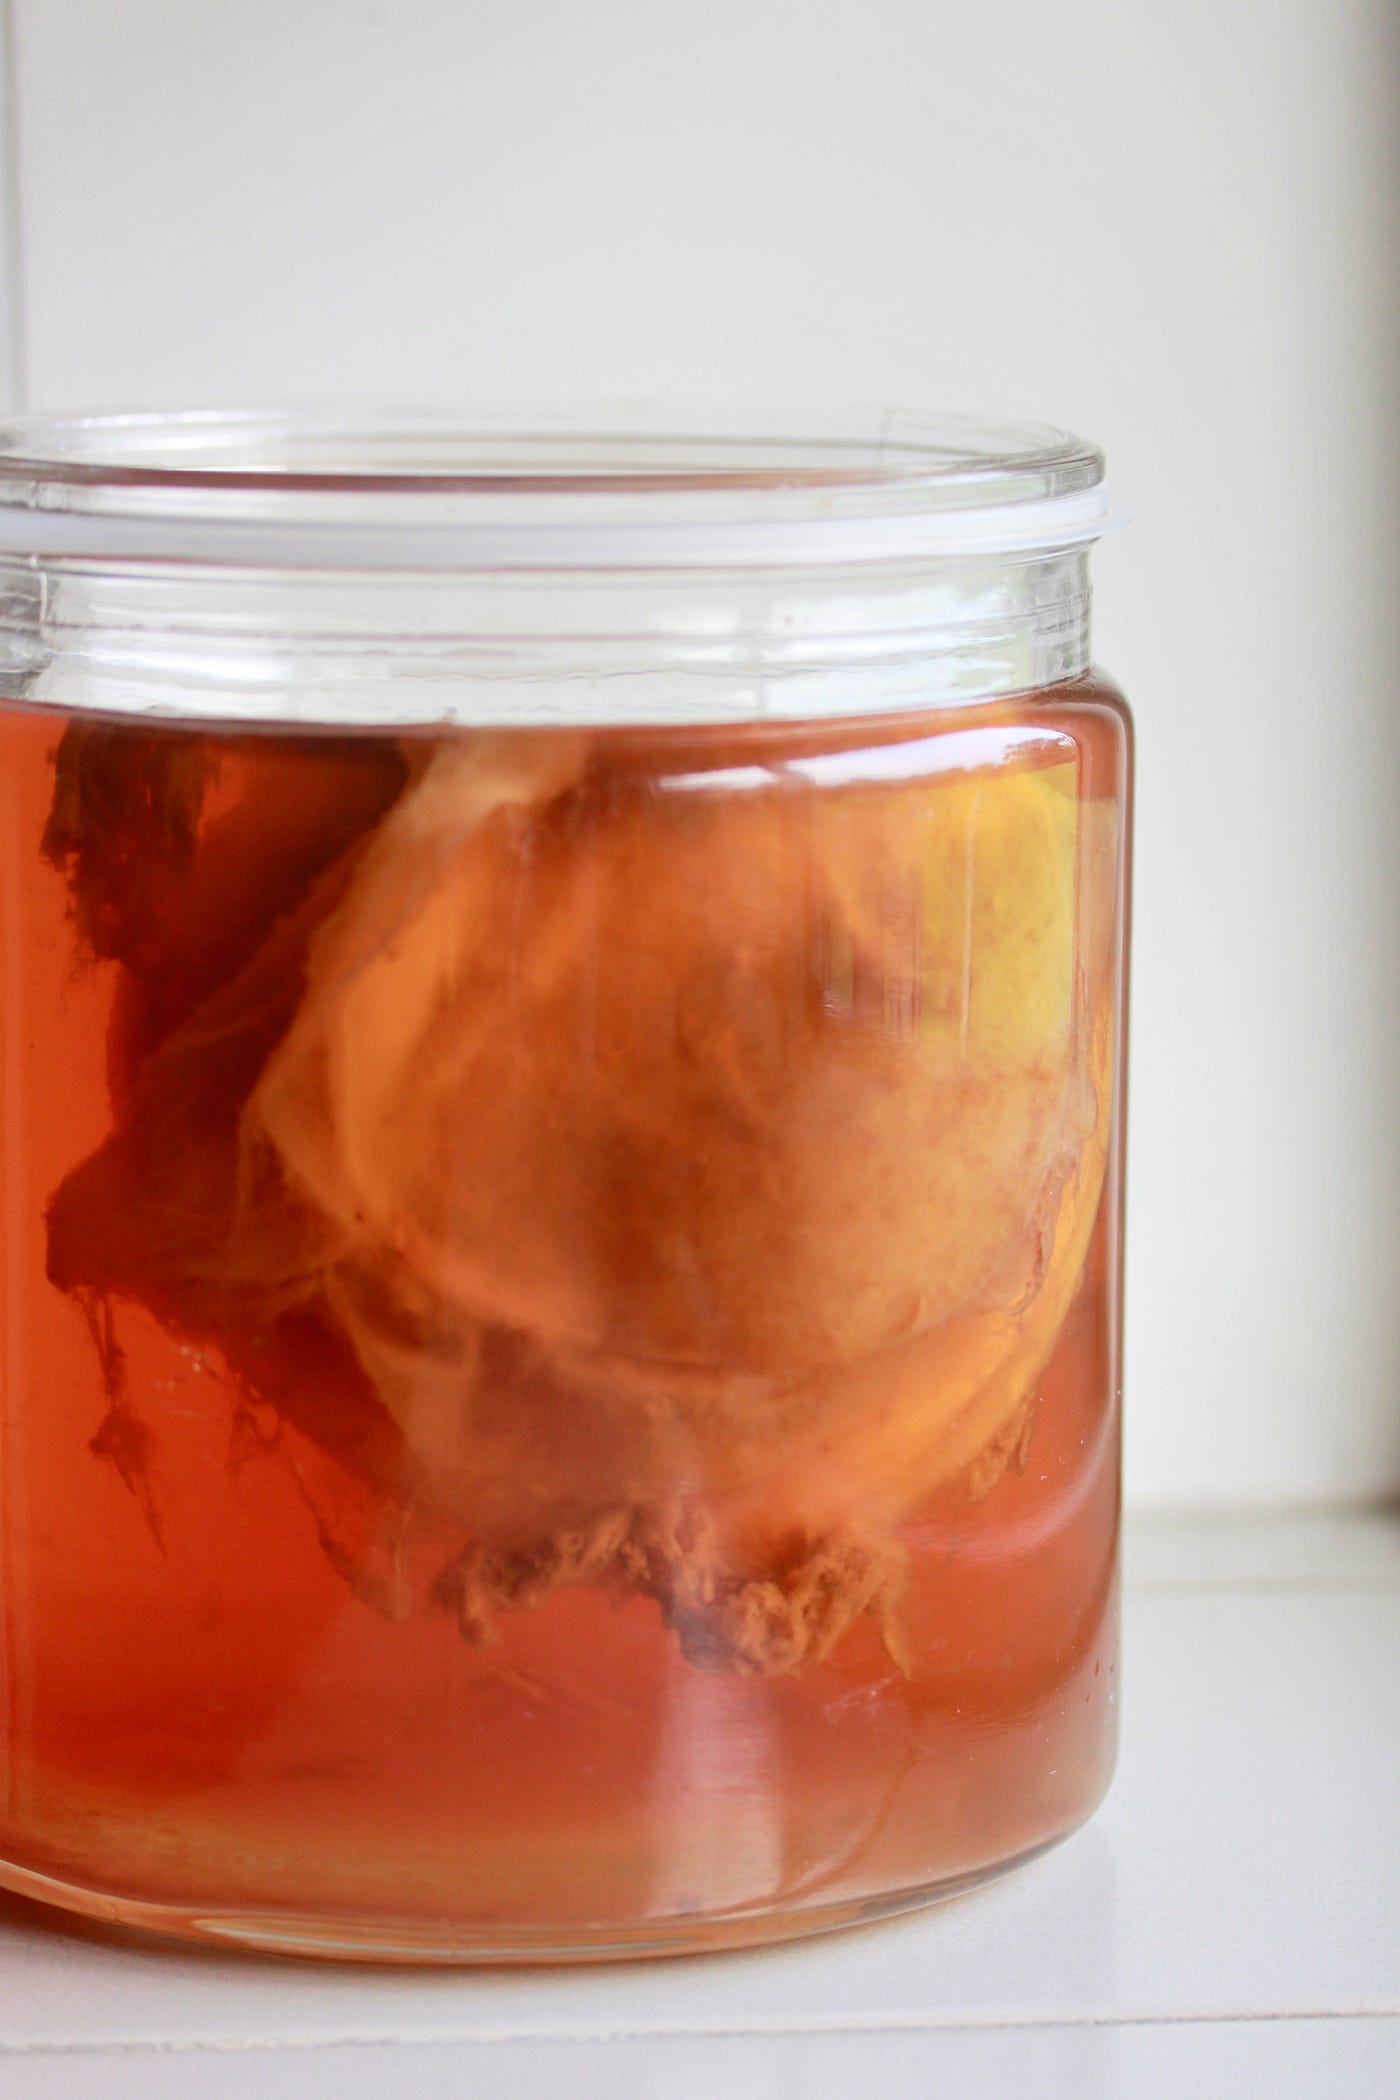 How to Grow Your Own Kombucha SCOBY - My Fermented Foods